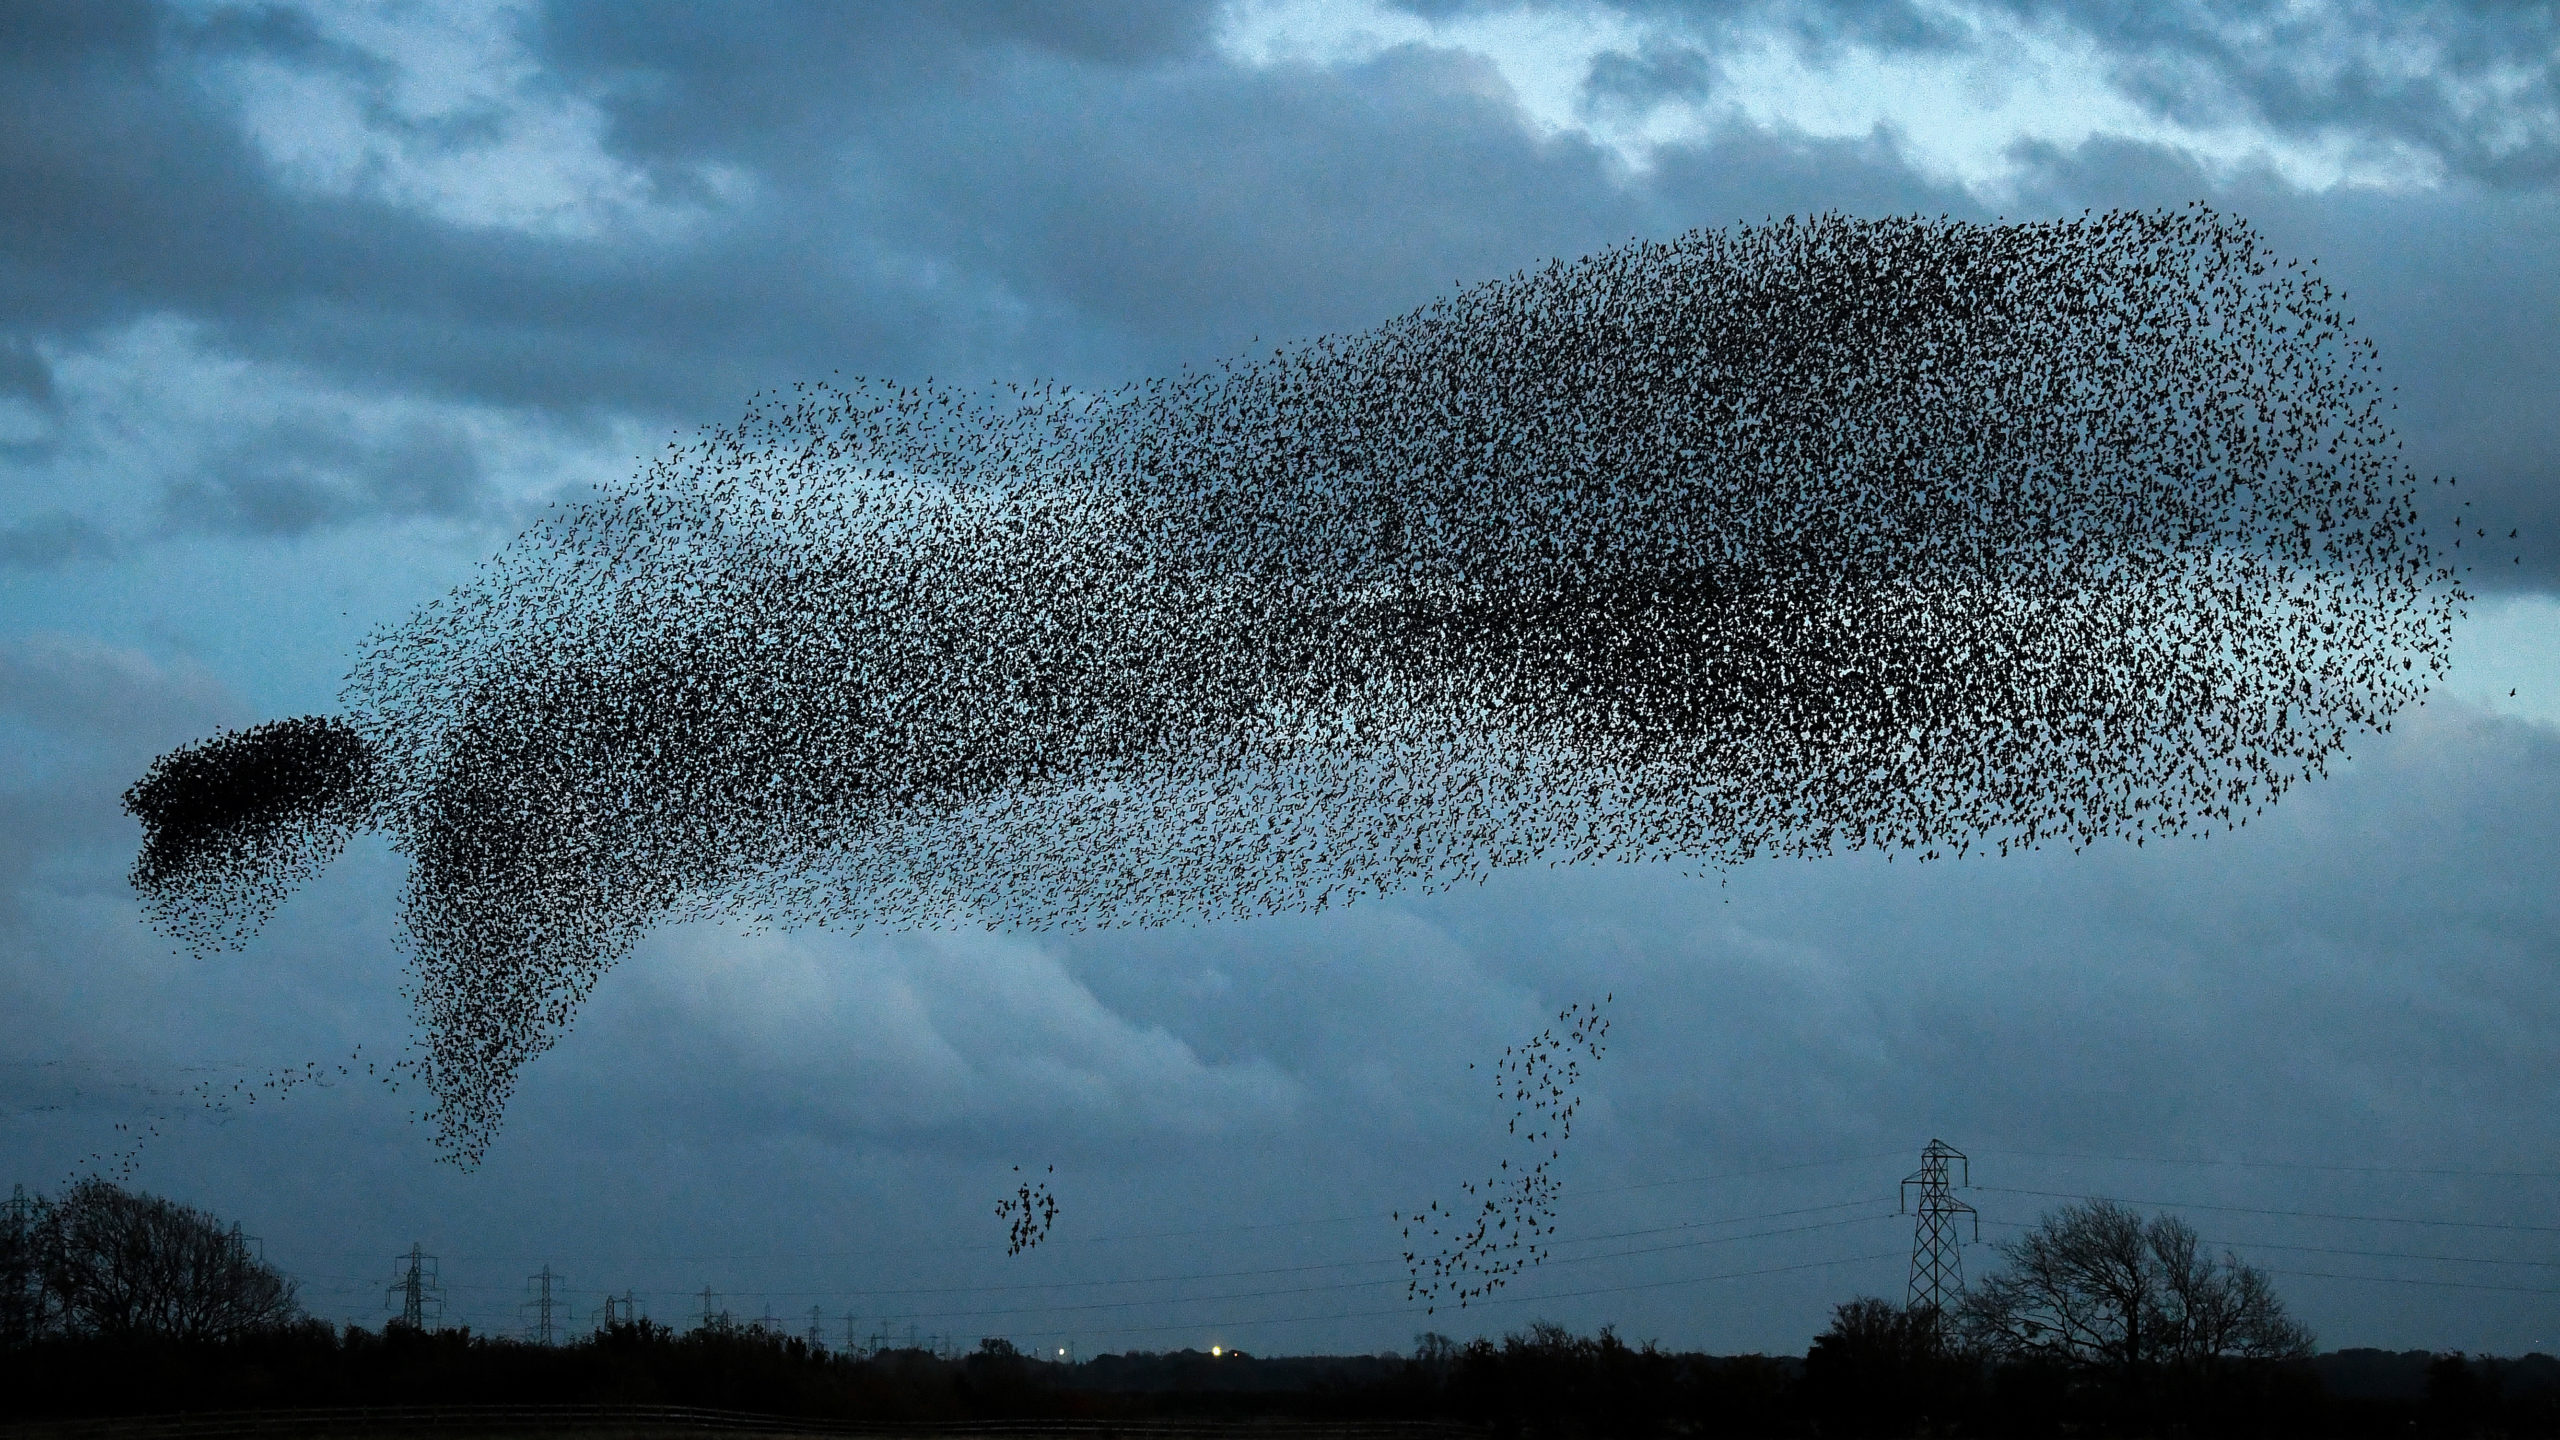 Scientists and experts believe that starlings flock in murmurations for various reasons, such as warding off predators, staying warm or sharing roosting site information. (Photo: Jeff J Mitchell, Getty Images)